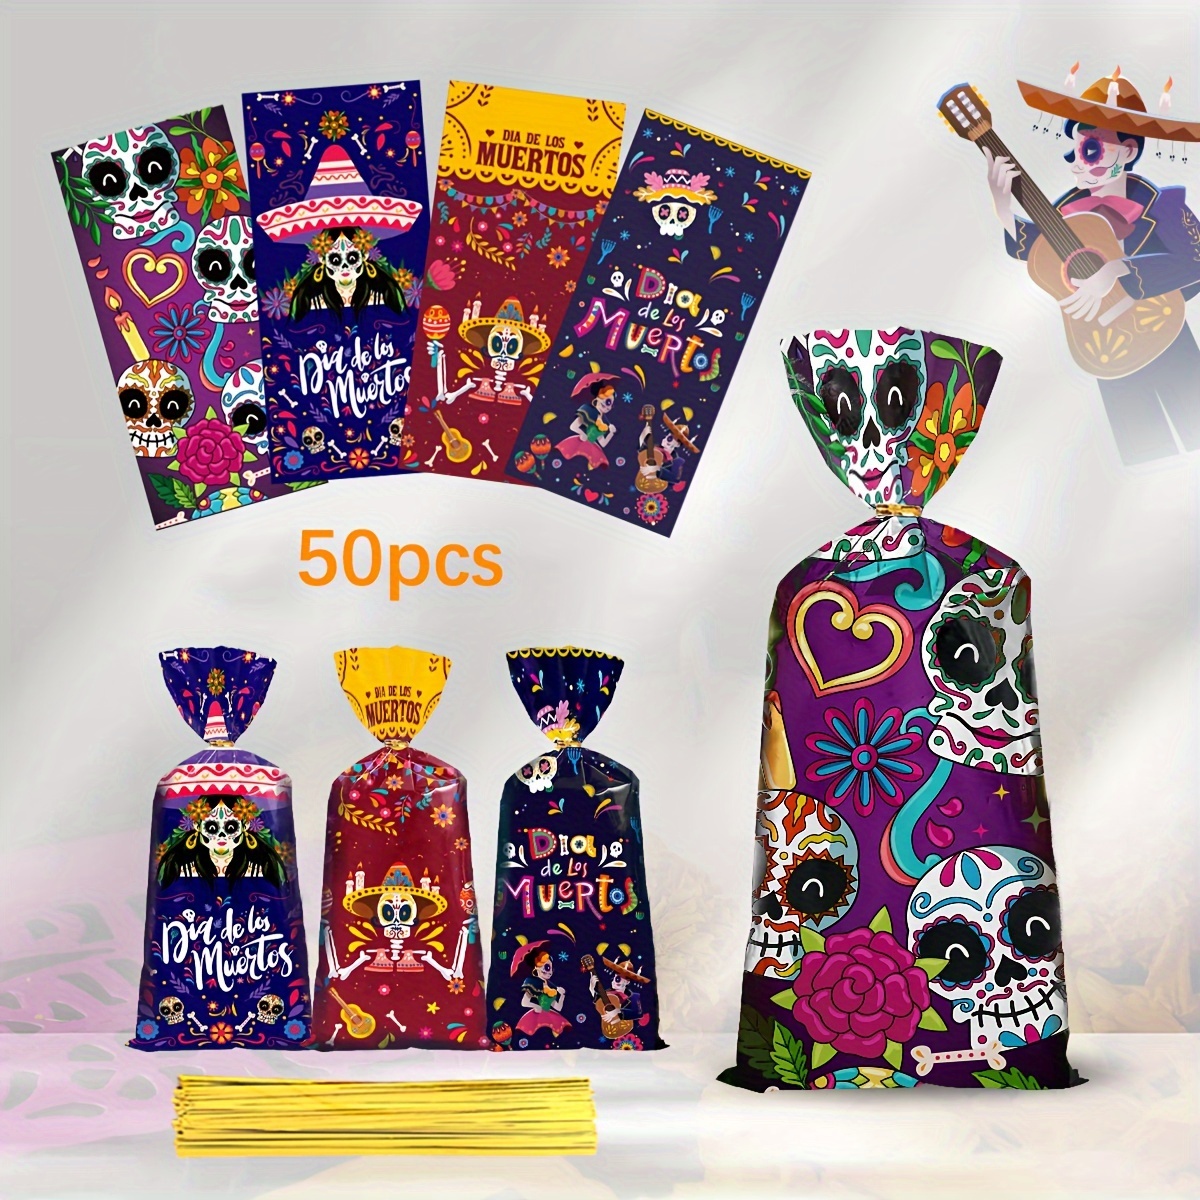 

50 Pcs Festive Day Of The Dead -design Candy Bags - Perfect For Halloween Or Dia De Los Muertos Parties - Cartoon , Plastic Material, No Components Included